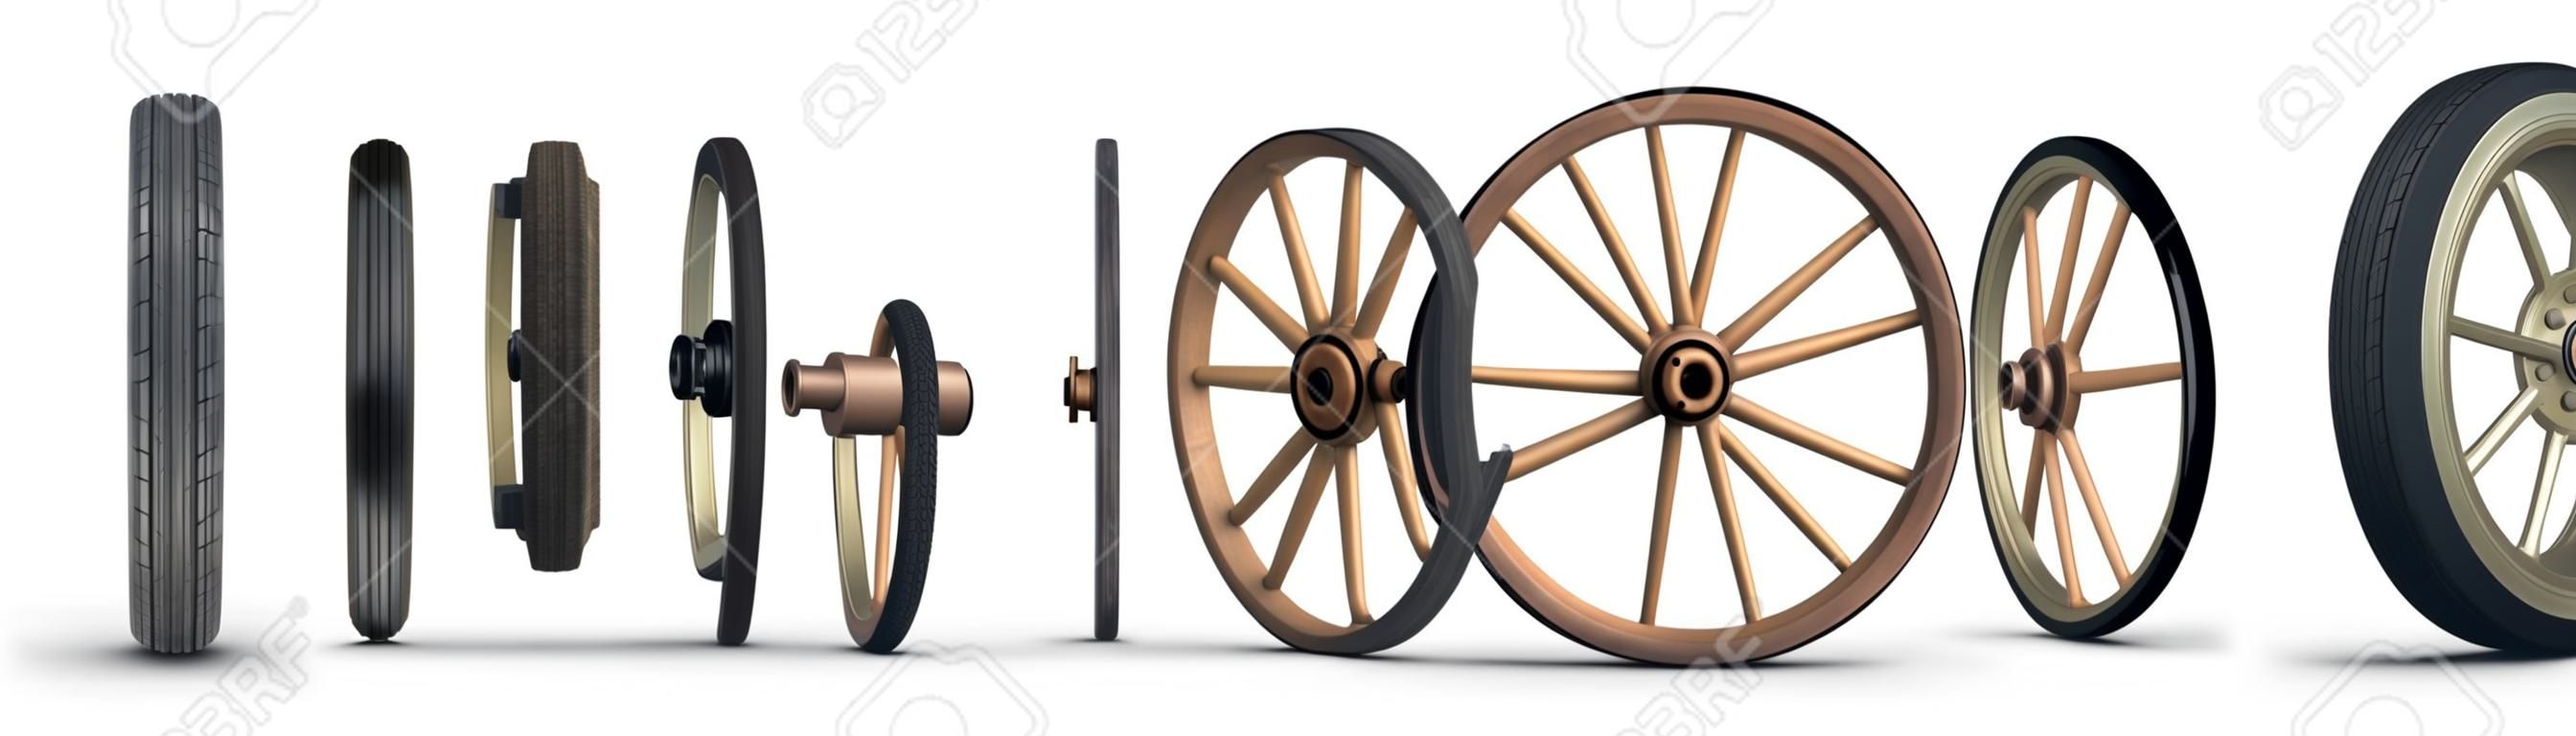 Illustration showing the evolution of the wheel starting from a stone wheel and ending with a steel belted radial tire. Shot on a white background.